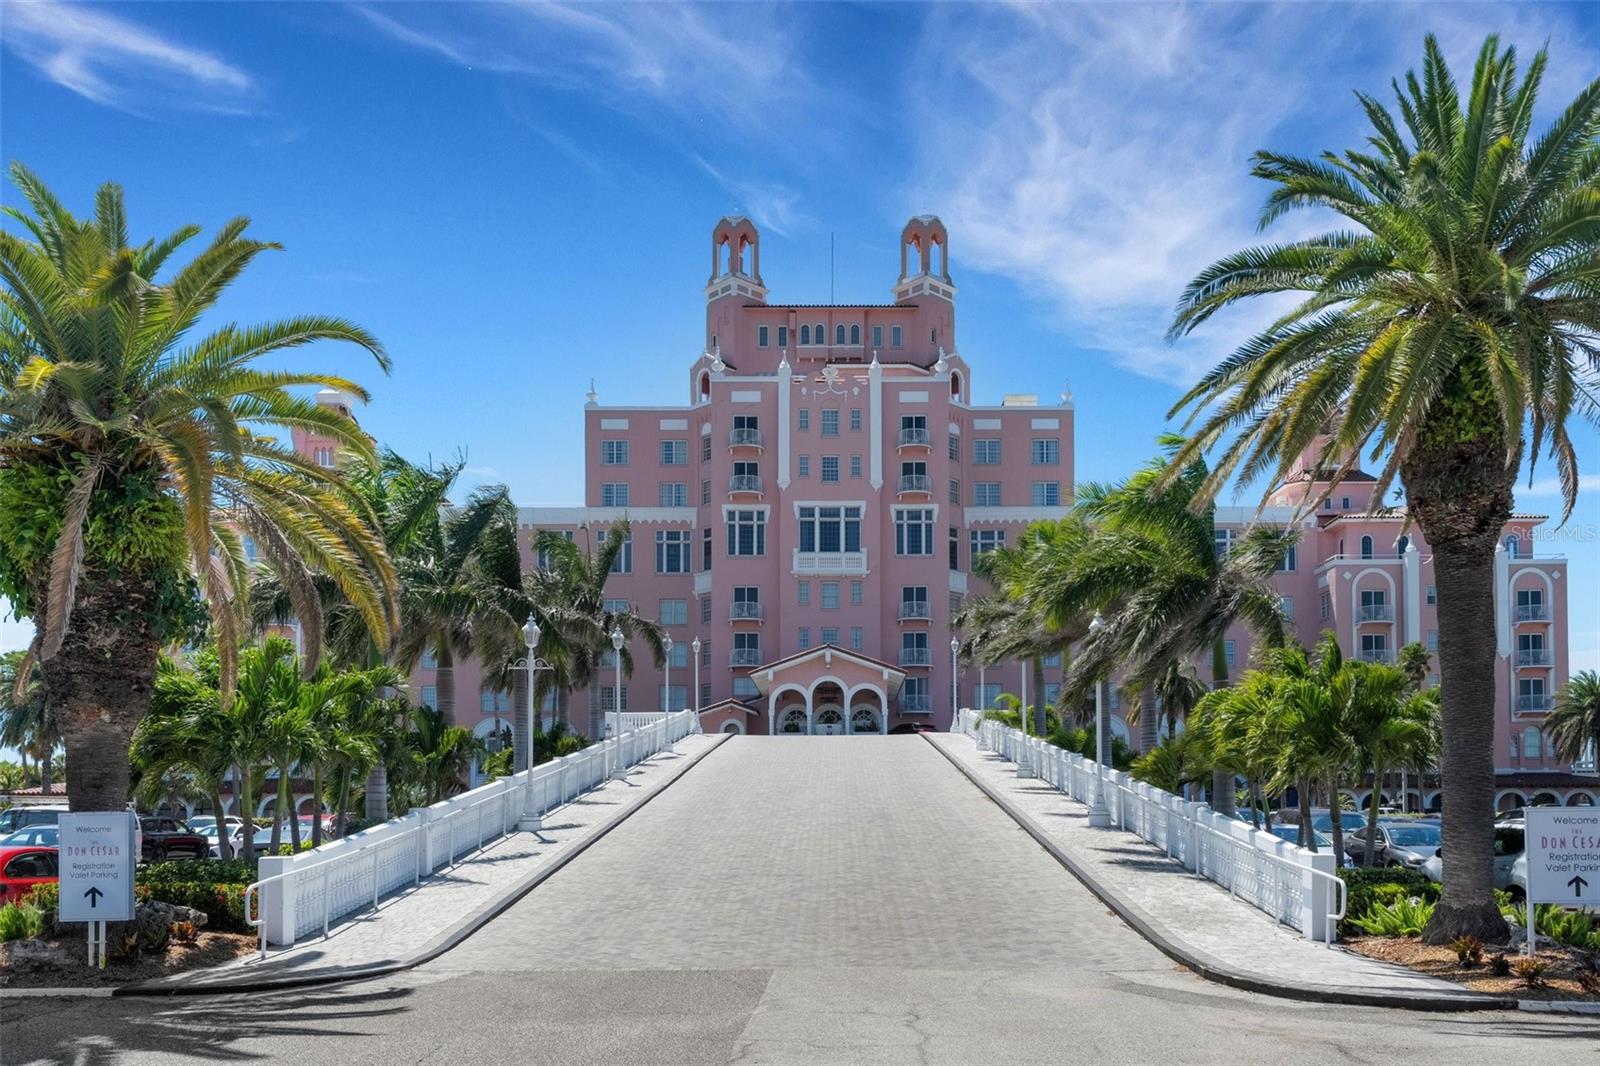 Iconic Don Cesar Resort just 3 blocks away, great restaurants, entertainment and exclusive membership offered